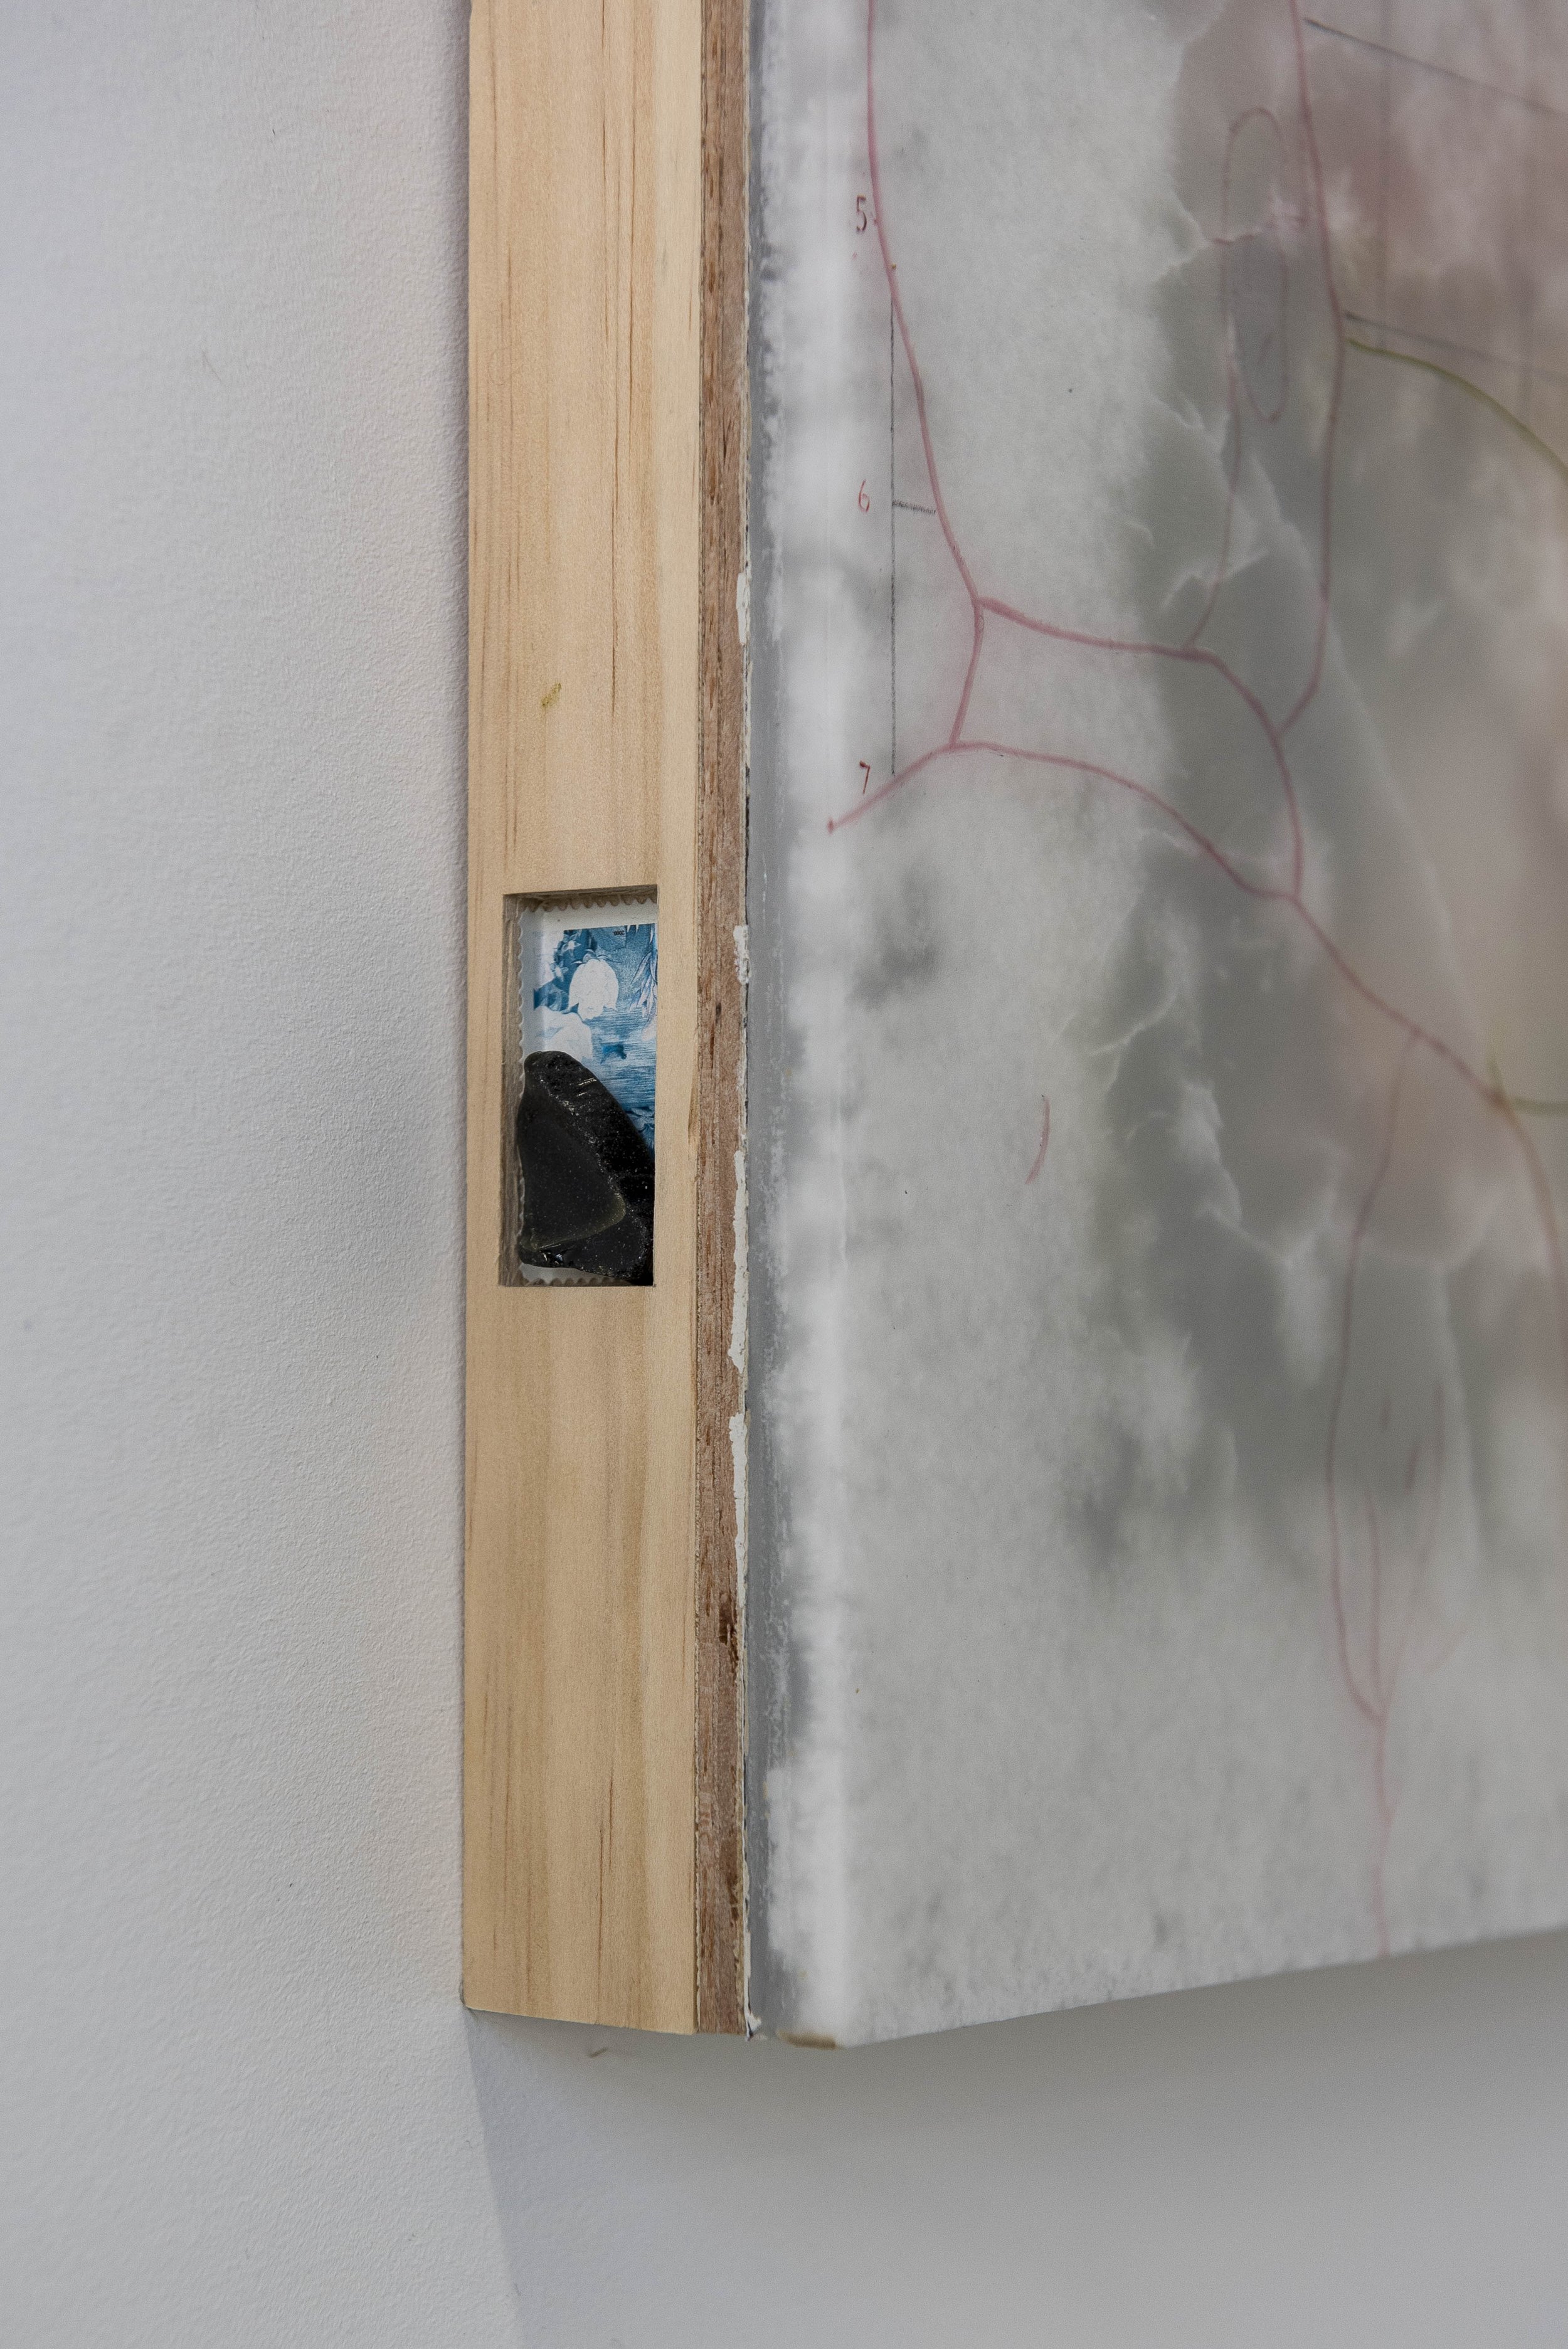   Jay as Garden Enthusiast  (detail), 2021   Triptych - paraffin wax, resin, oil paint, paper, canvas, found objects on plywood and pine cradle frame.   Each panel measures 34 x 33.5 x 4 cm.   Image courtesy of Jordan Halsall. 